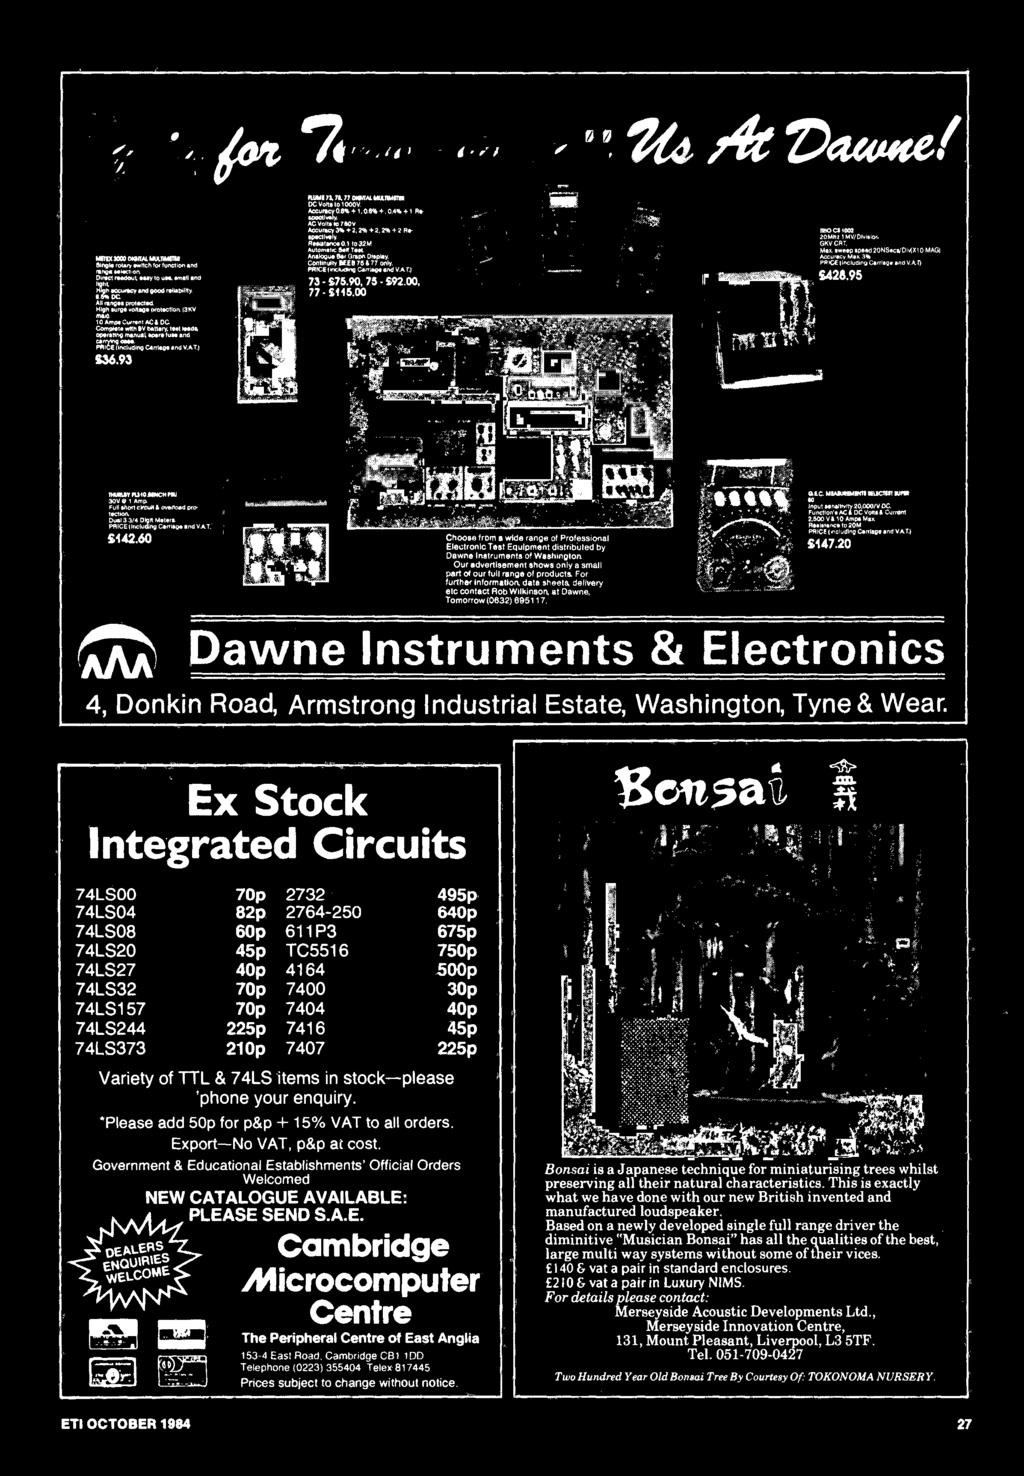 60 na Choose from a wide range of Professional Electronic Test Equipment distributed by Dawns Instruments of Washington. Our advertisement shows only a small part of our full range of products.